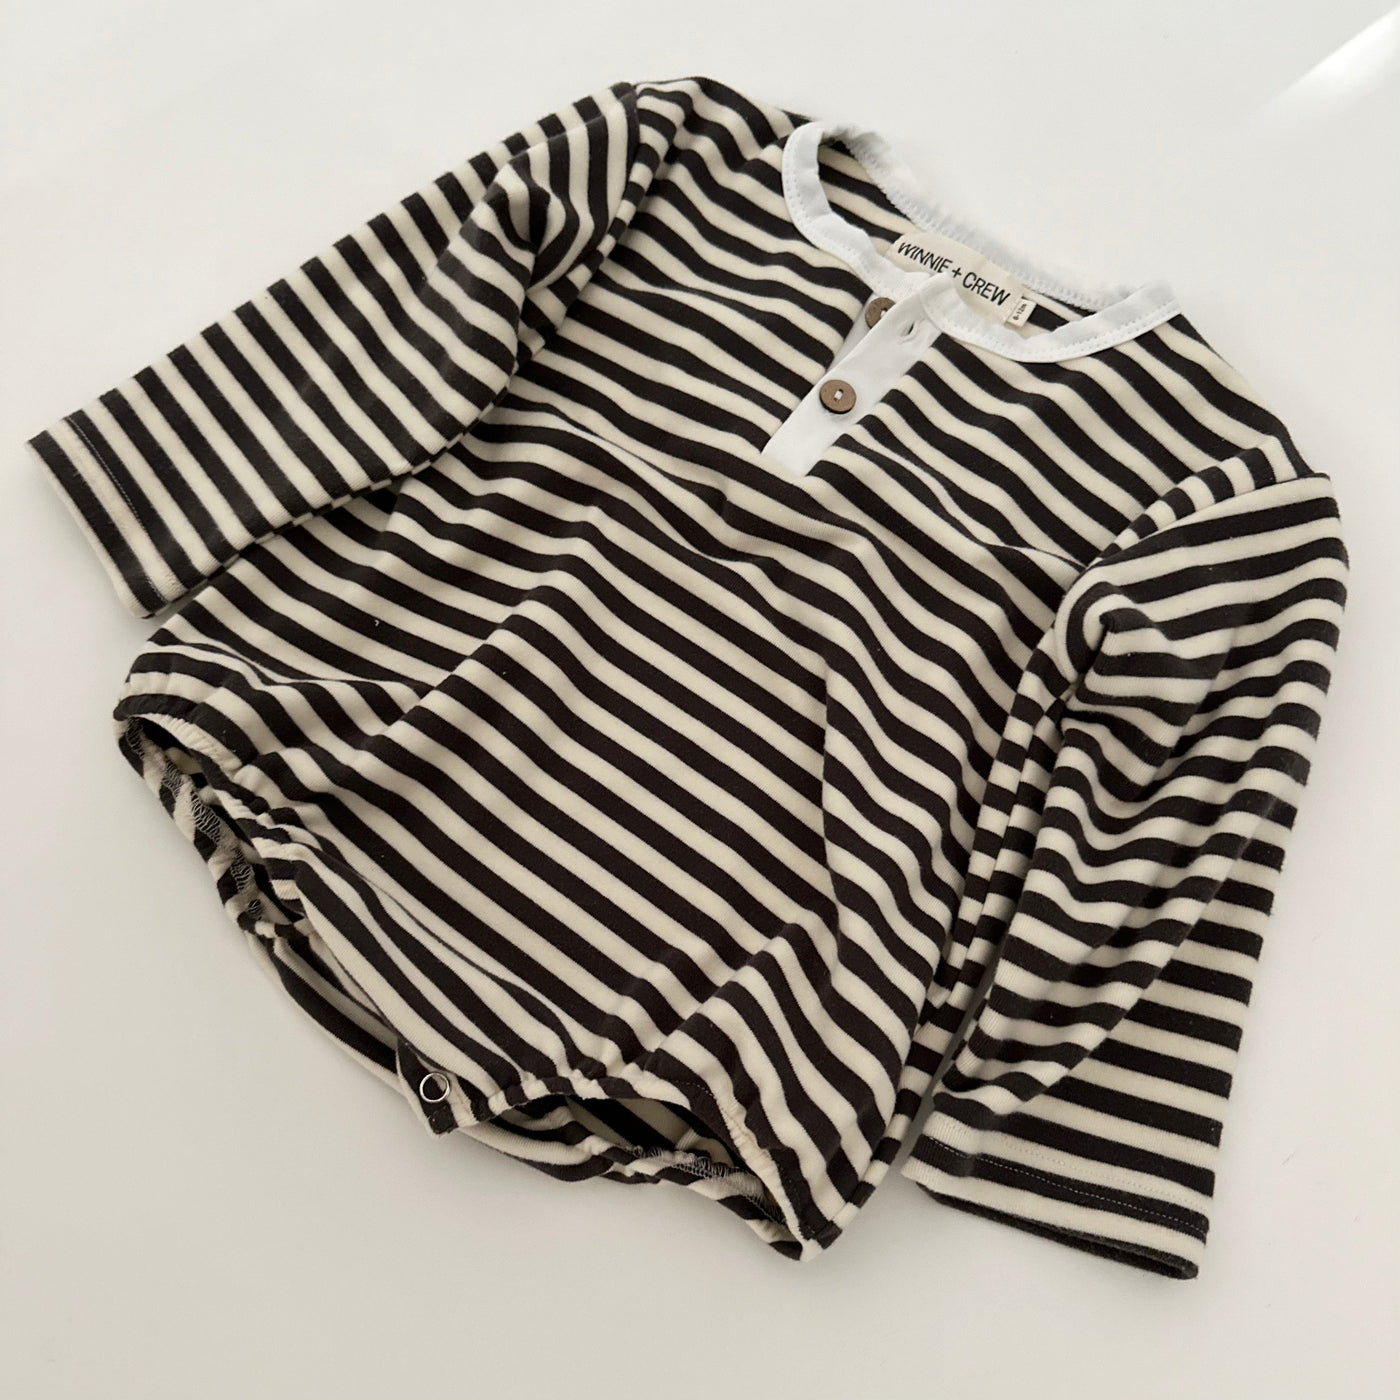 a striped shirt on a white surface